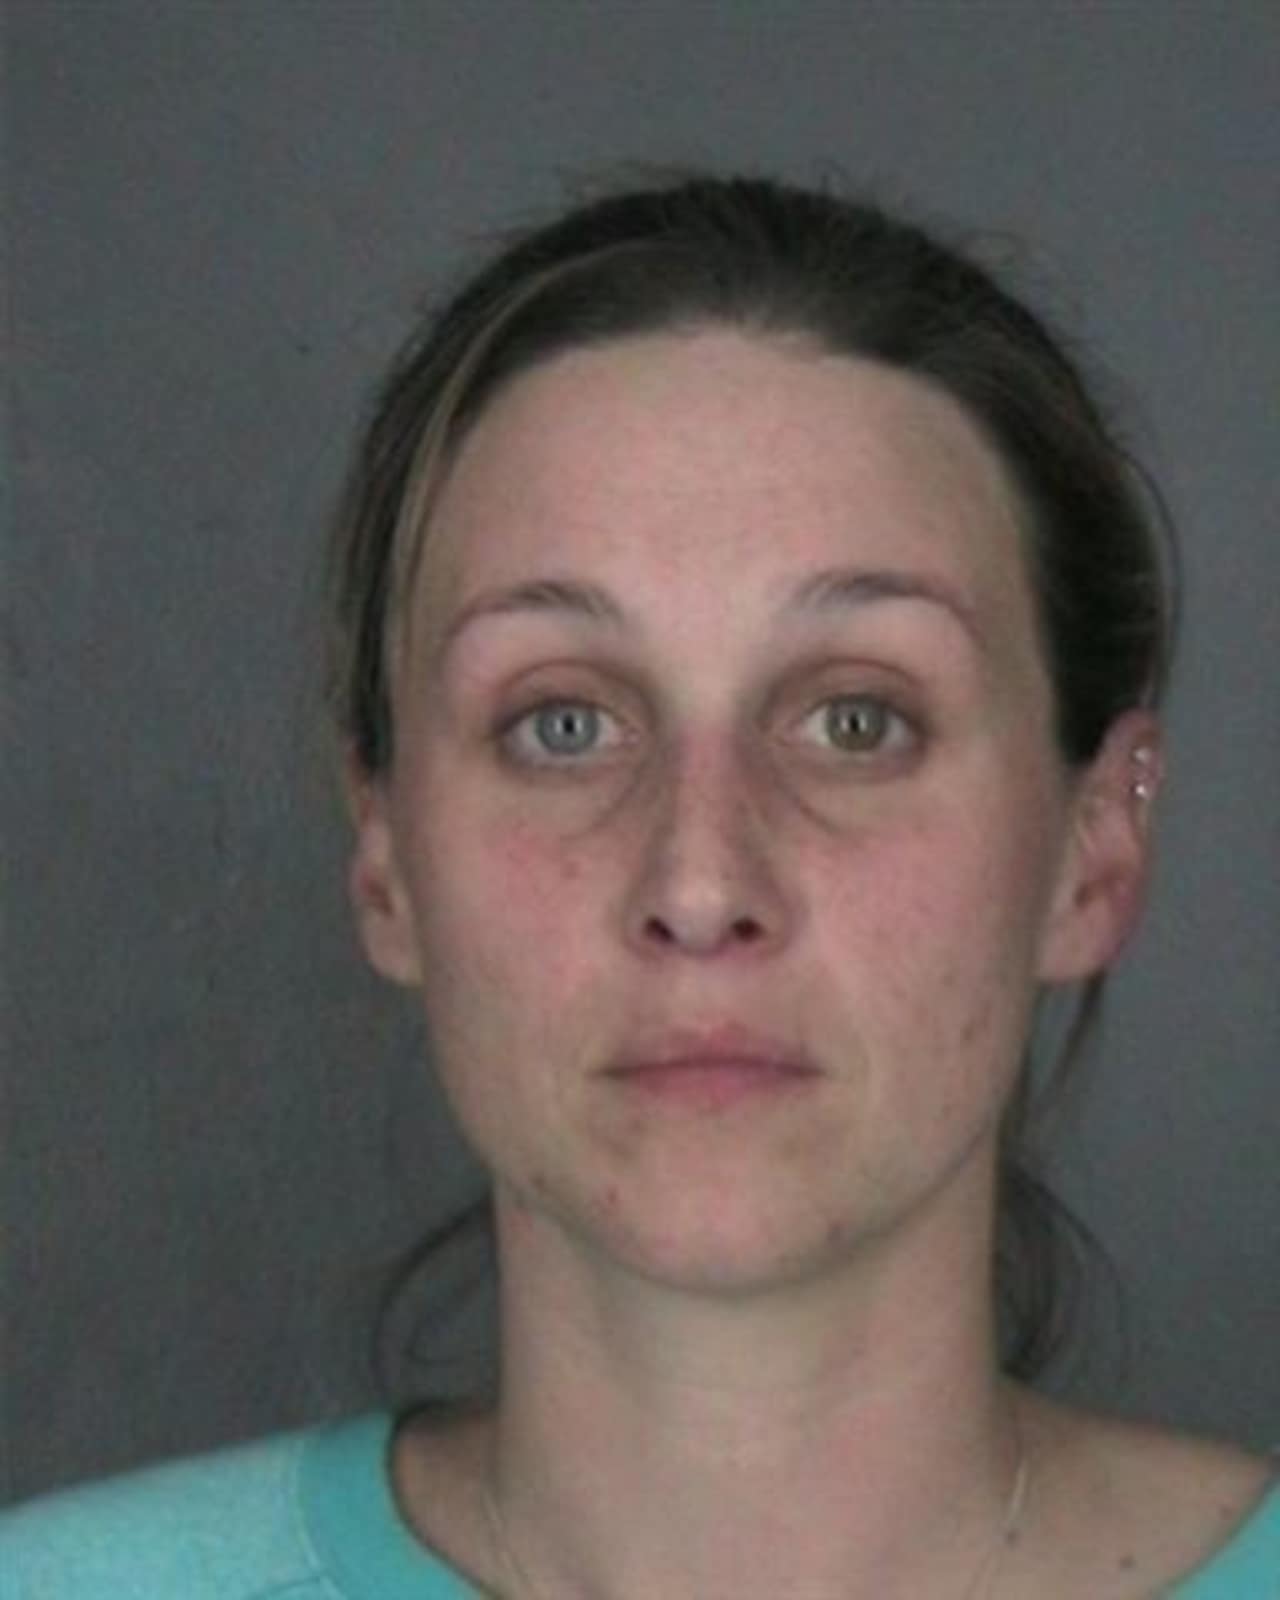 Leake and Watts teacher Meaghan White was arrested on sex charges early this morning.

Originally published: December 5, 2013 8:41 AM
Updated: December 5, 2013 2:42 PM

A femal